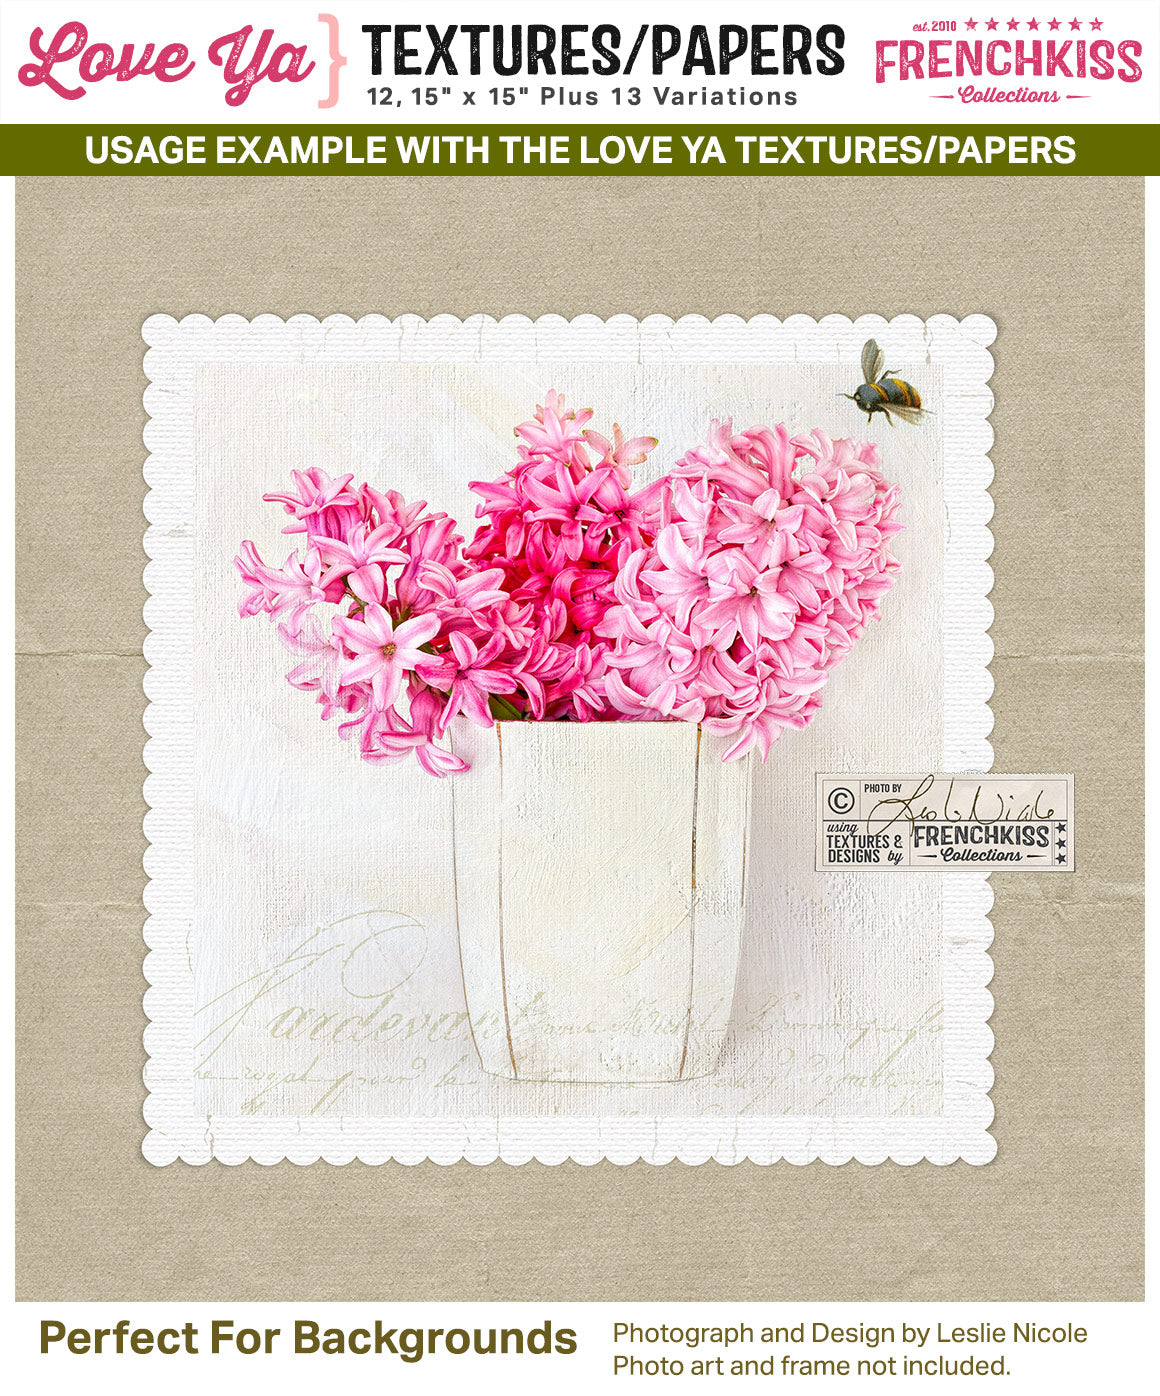 Usage example showing a texture / digital paper from the Love Ya collection as a background for a photograph.